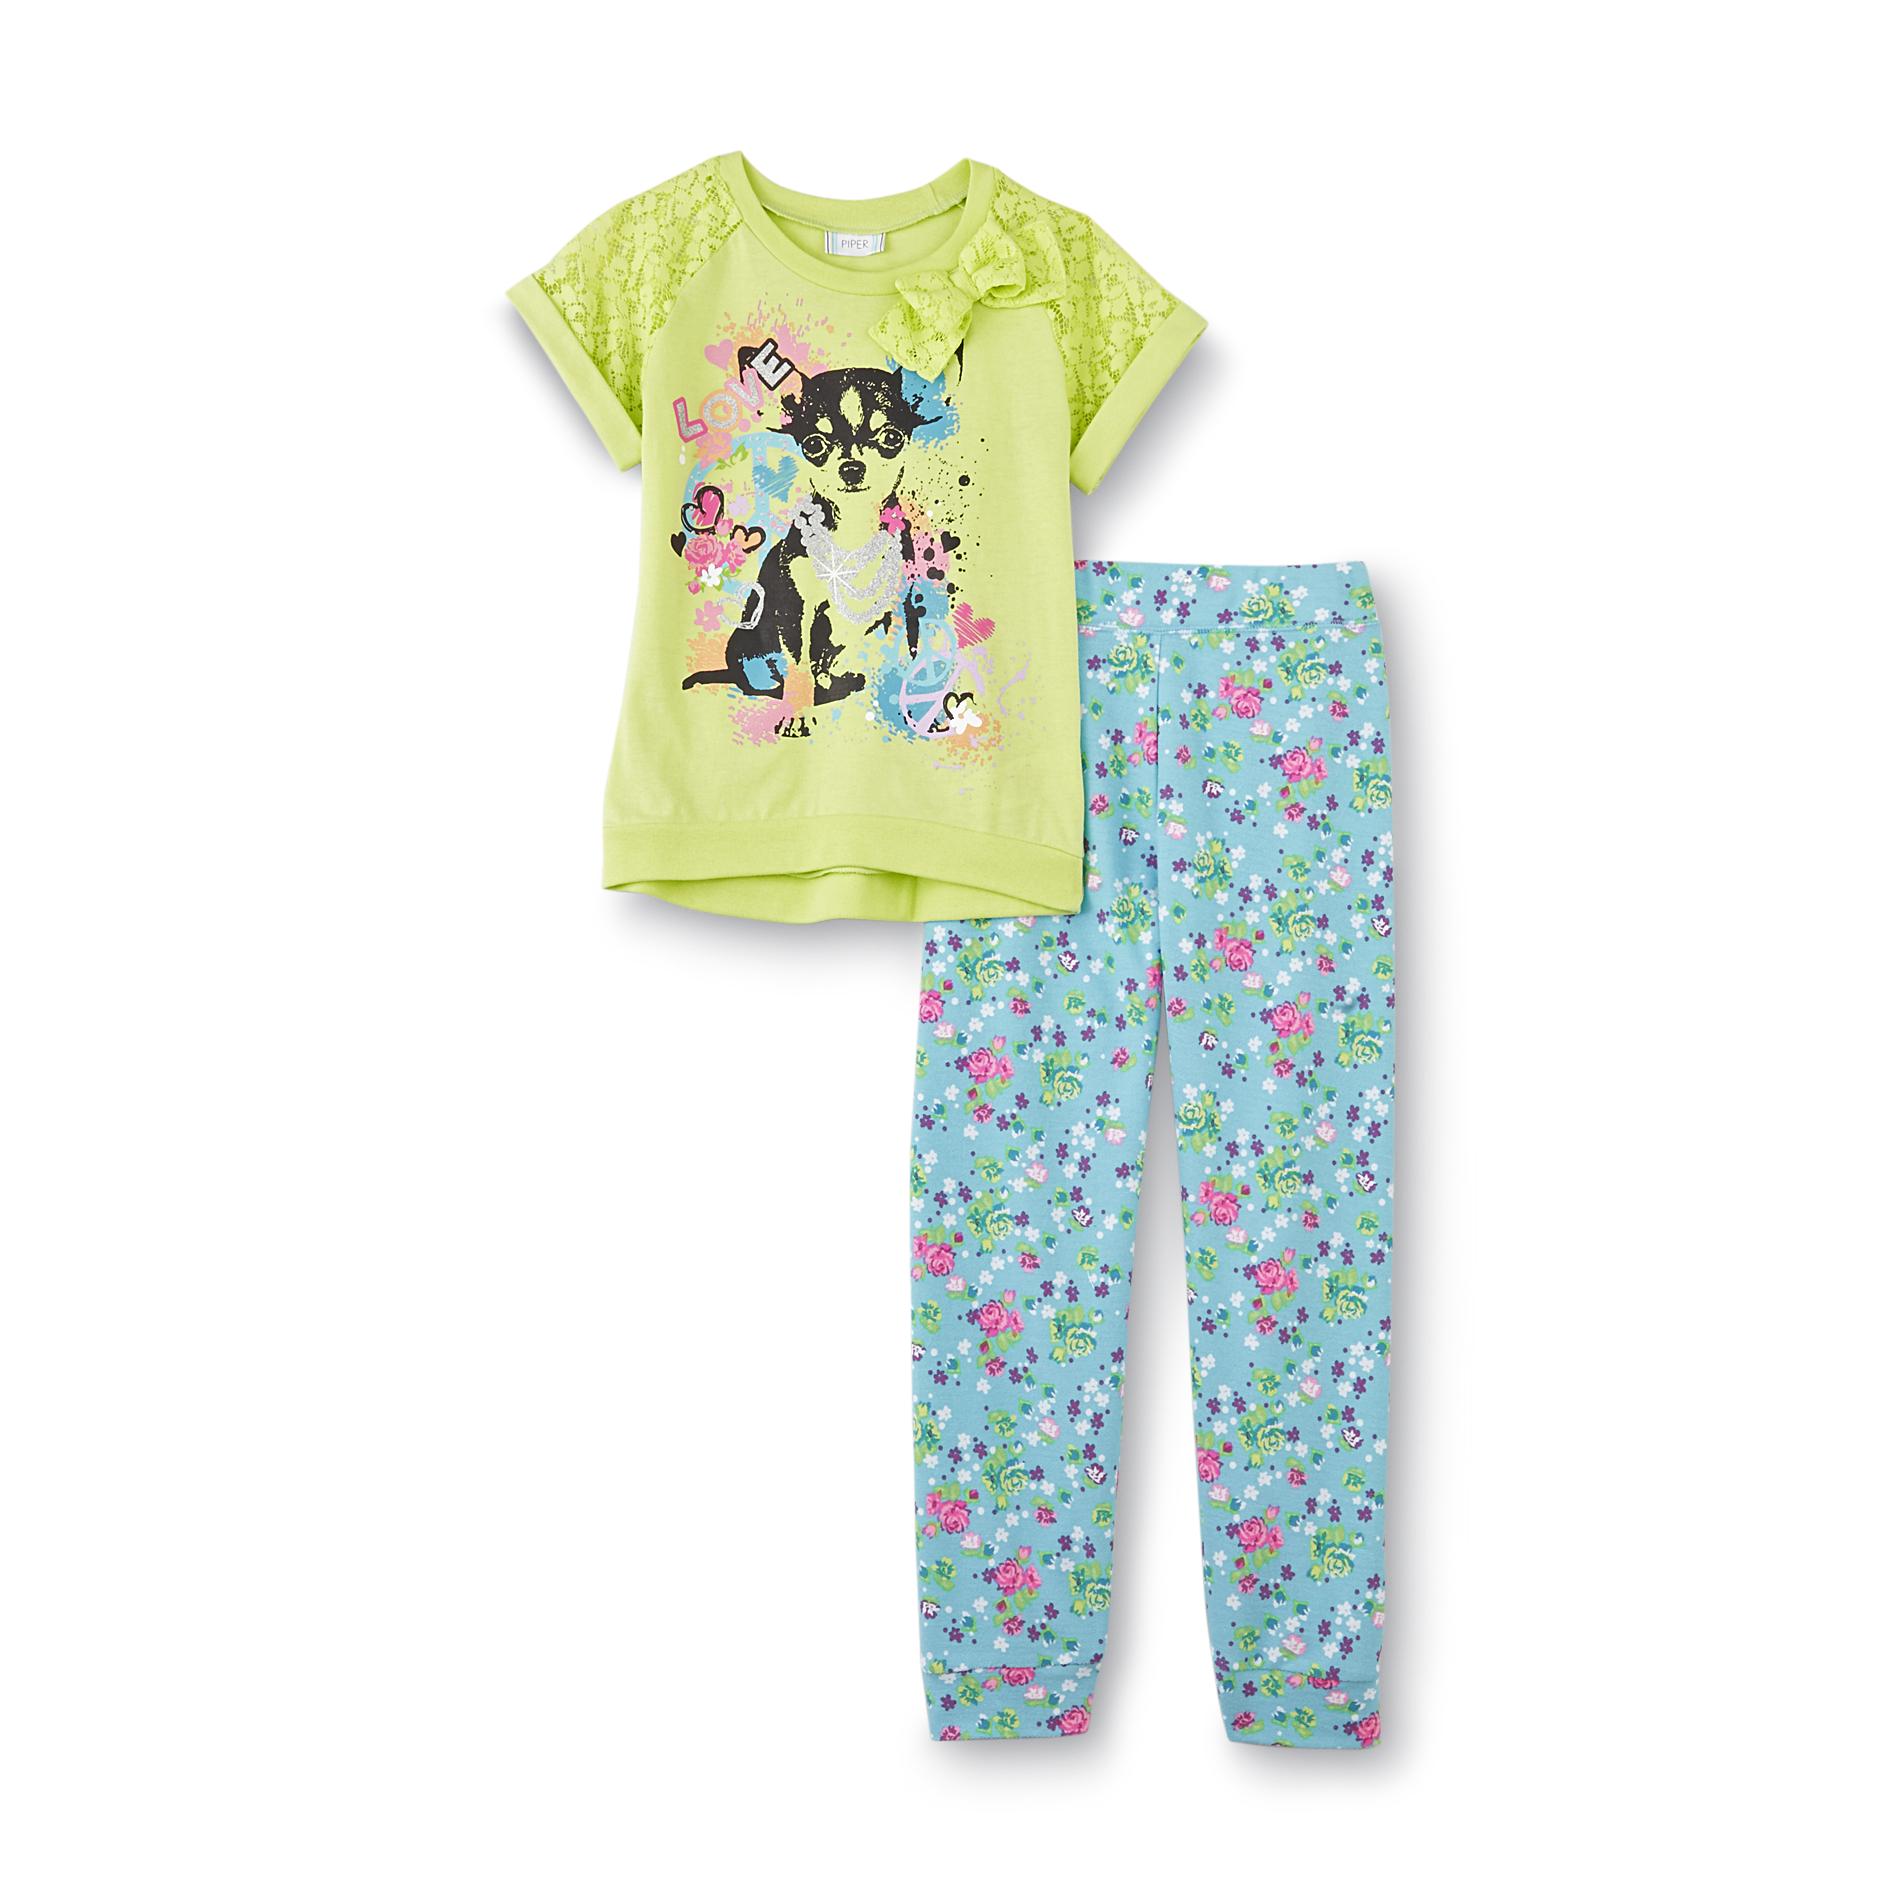 Piper Girl's Graphic Top & Sweatpants - Dog